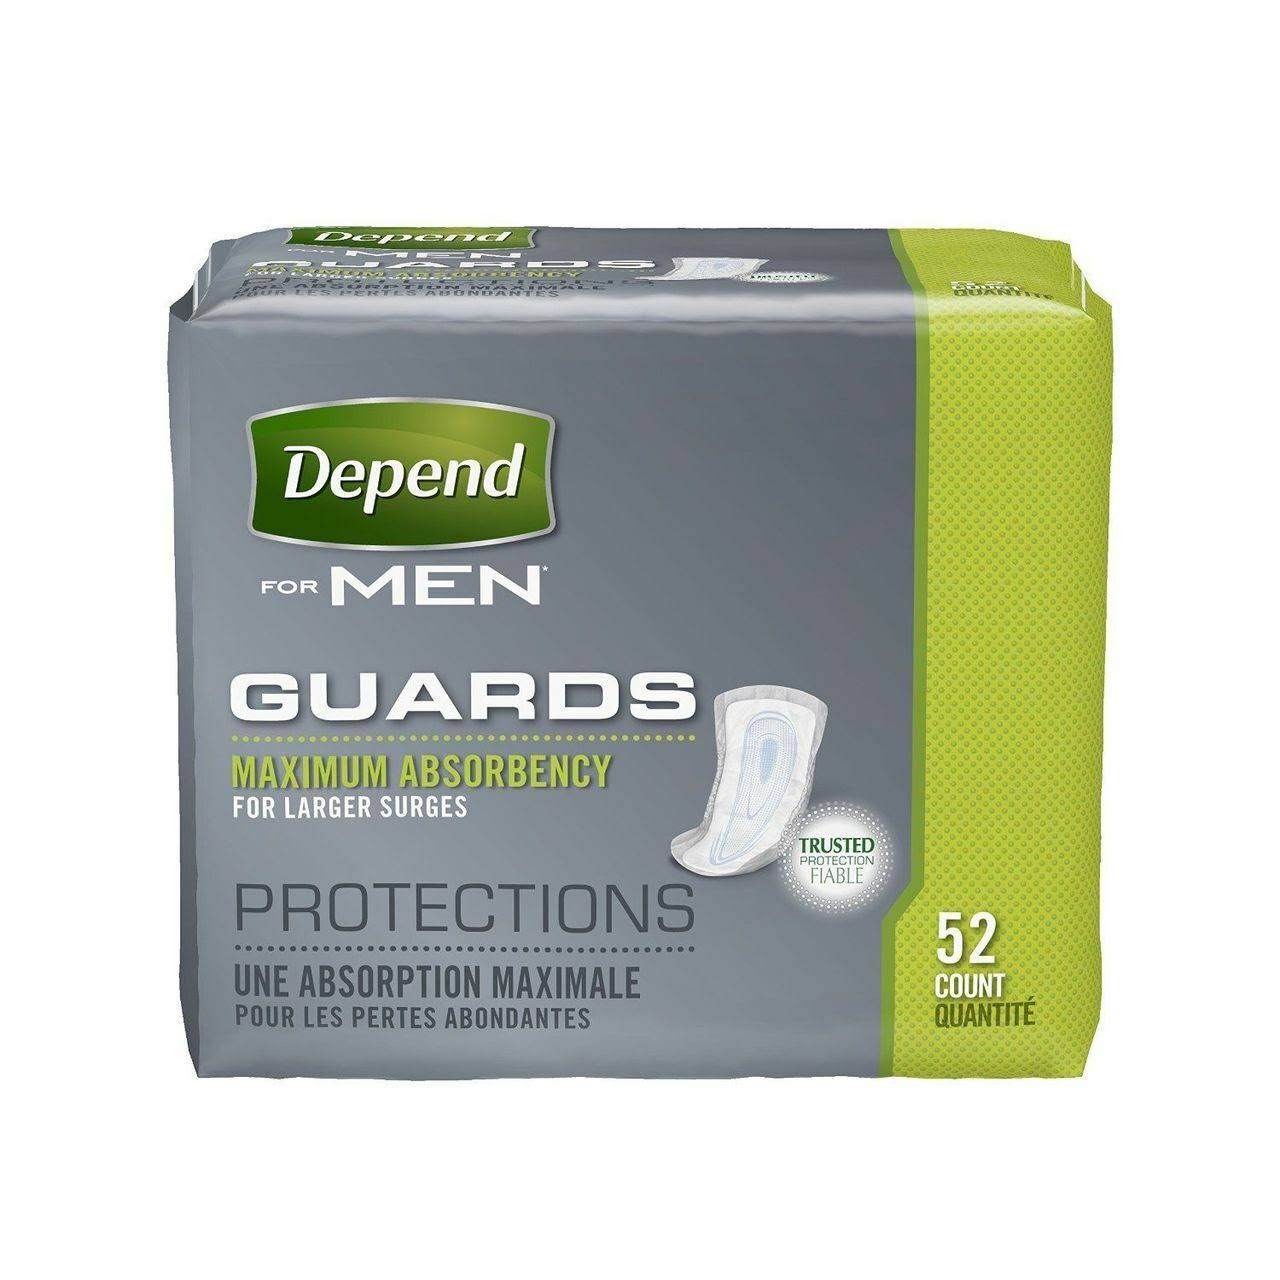 Depend for Men Maximum Absorbency Guards - 52ct